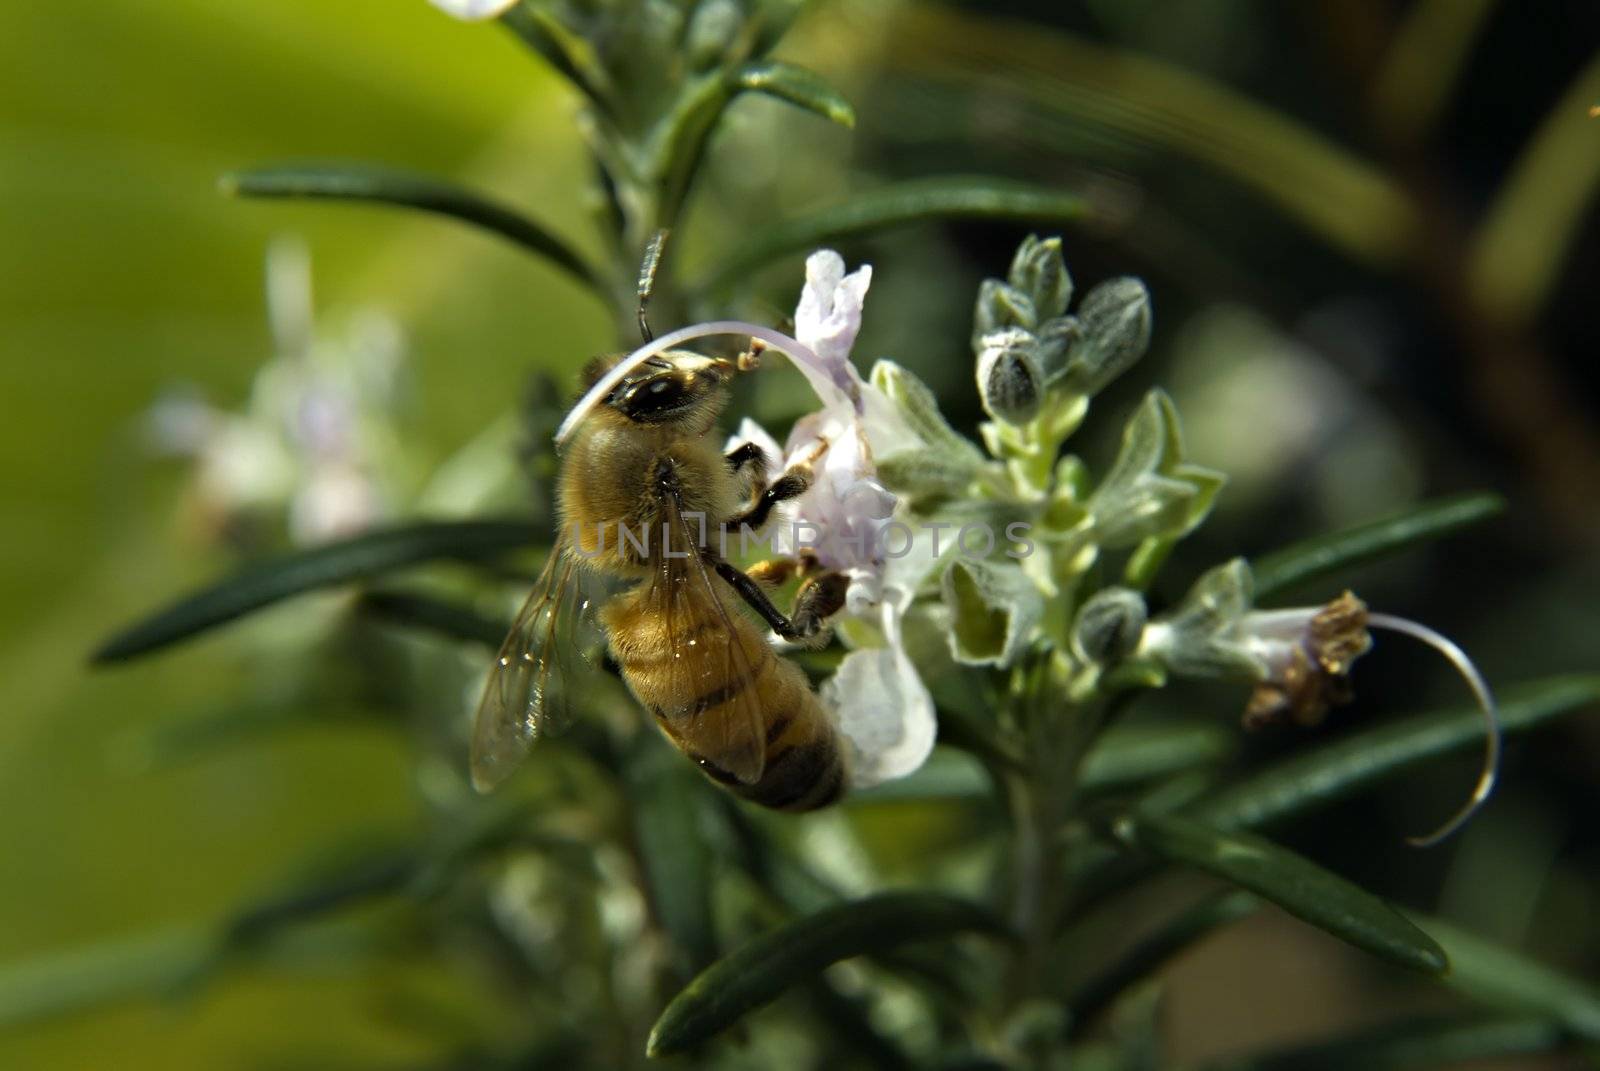 clos-up of a Bee on Rosemary flower